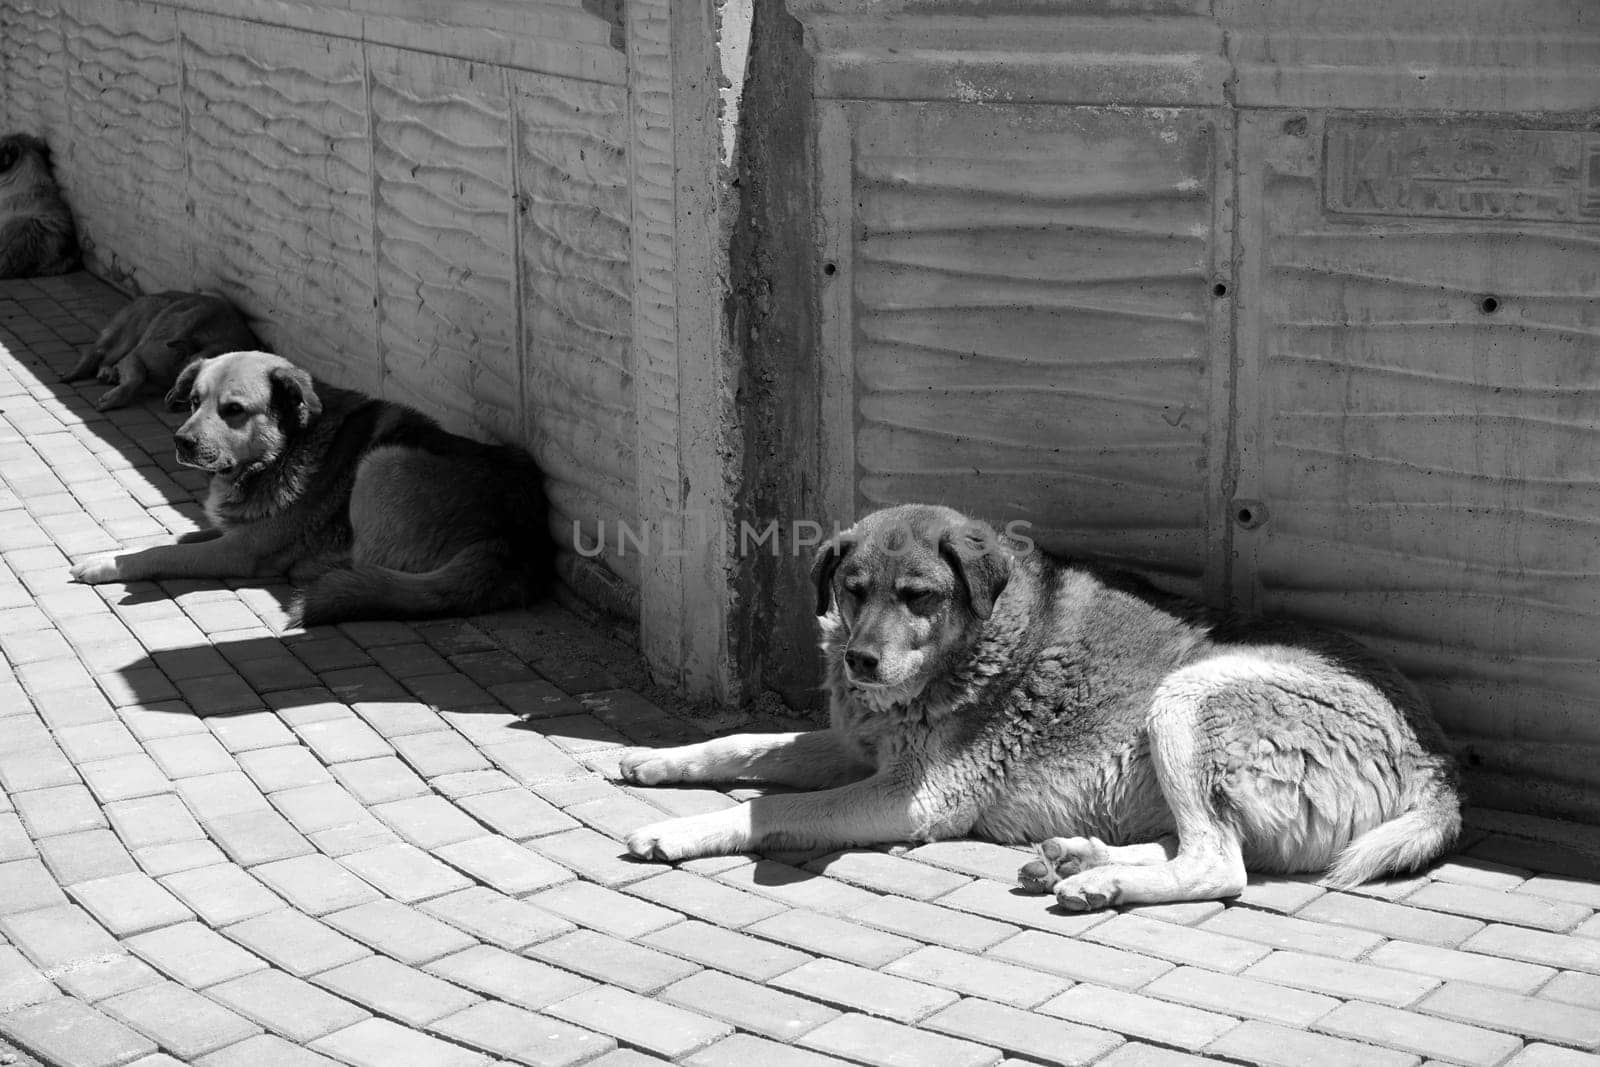 stray dogs lying on street pavements, stray dogs in the city, by nhatipoglu